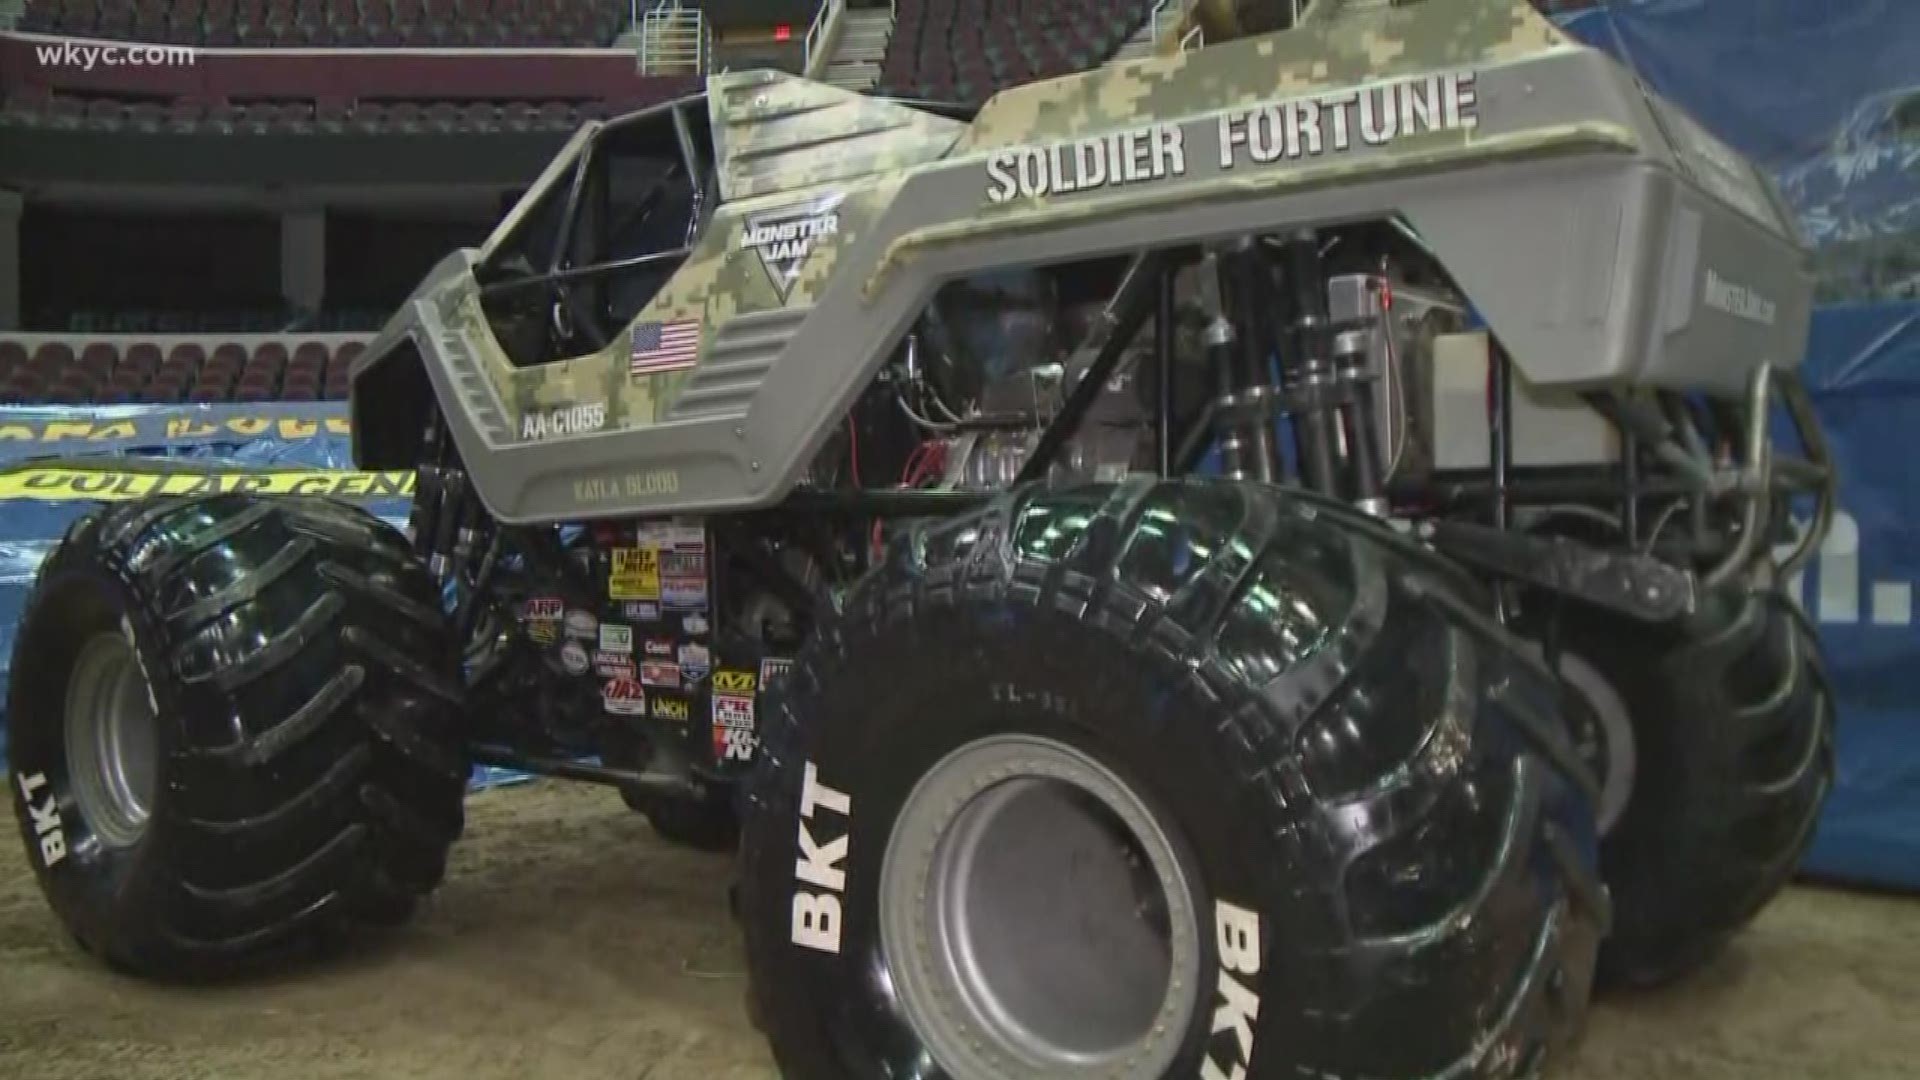 Feb. 15, 2019: See your favorite monster trucks this weekend at Quicken Loans Arena.